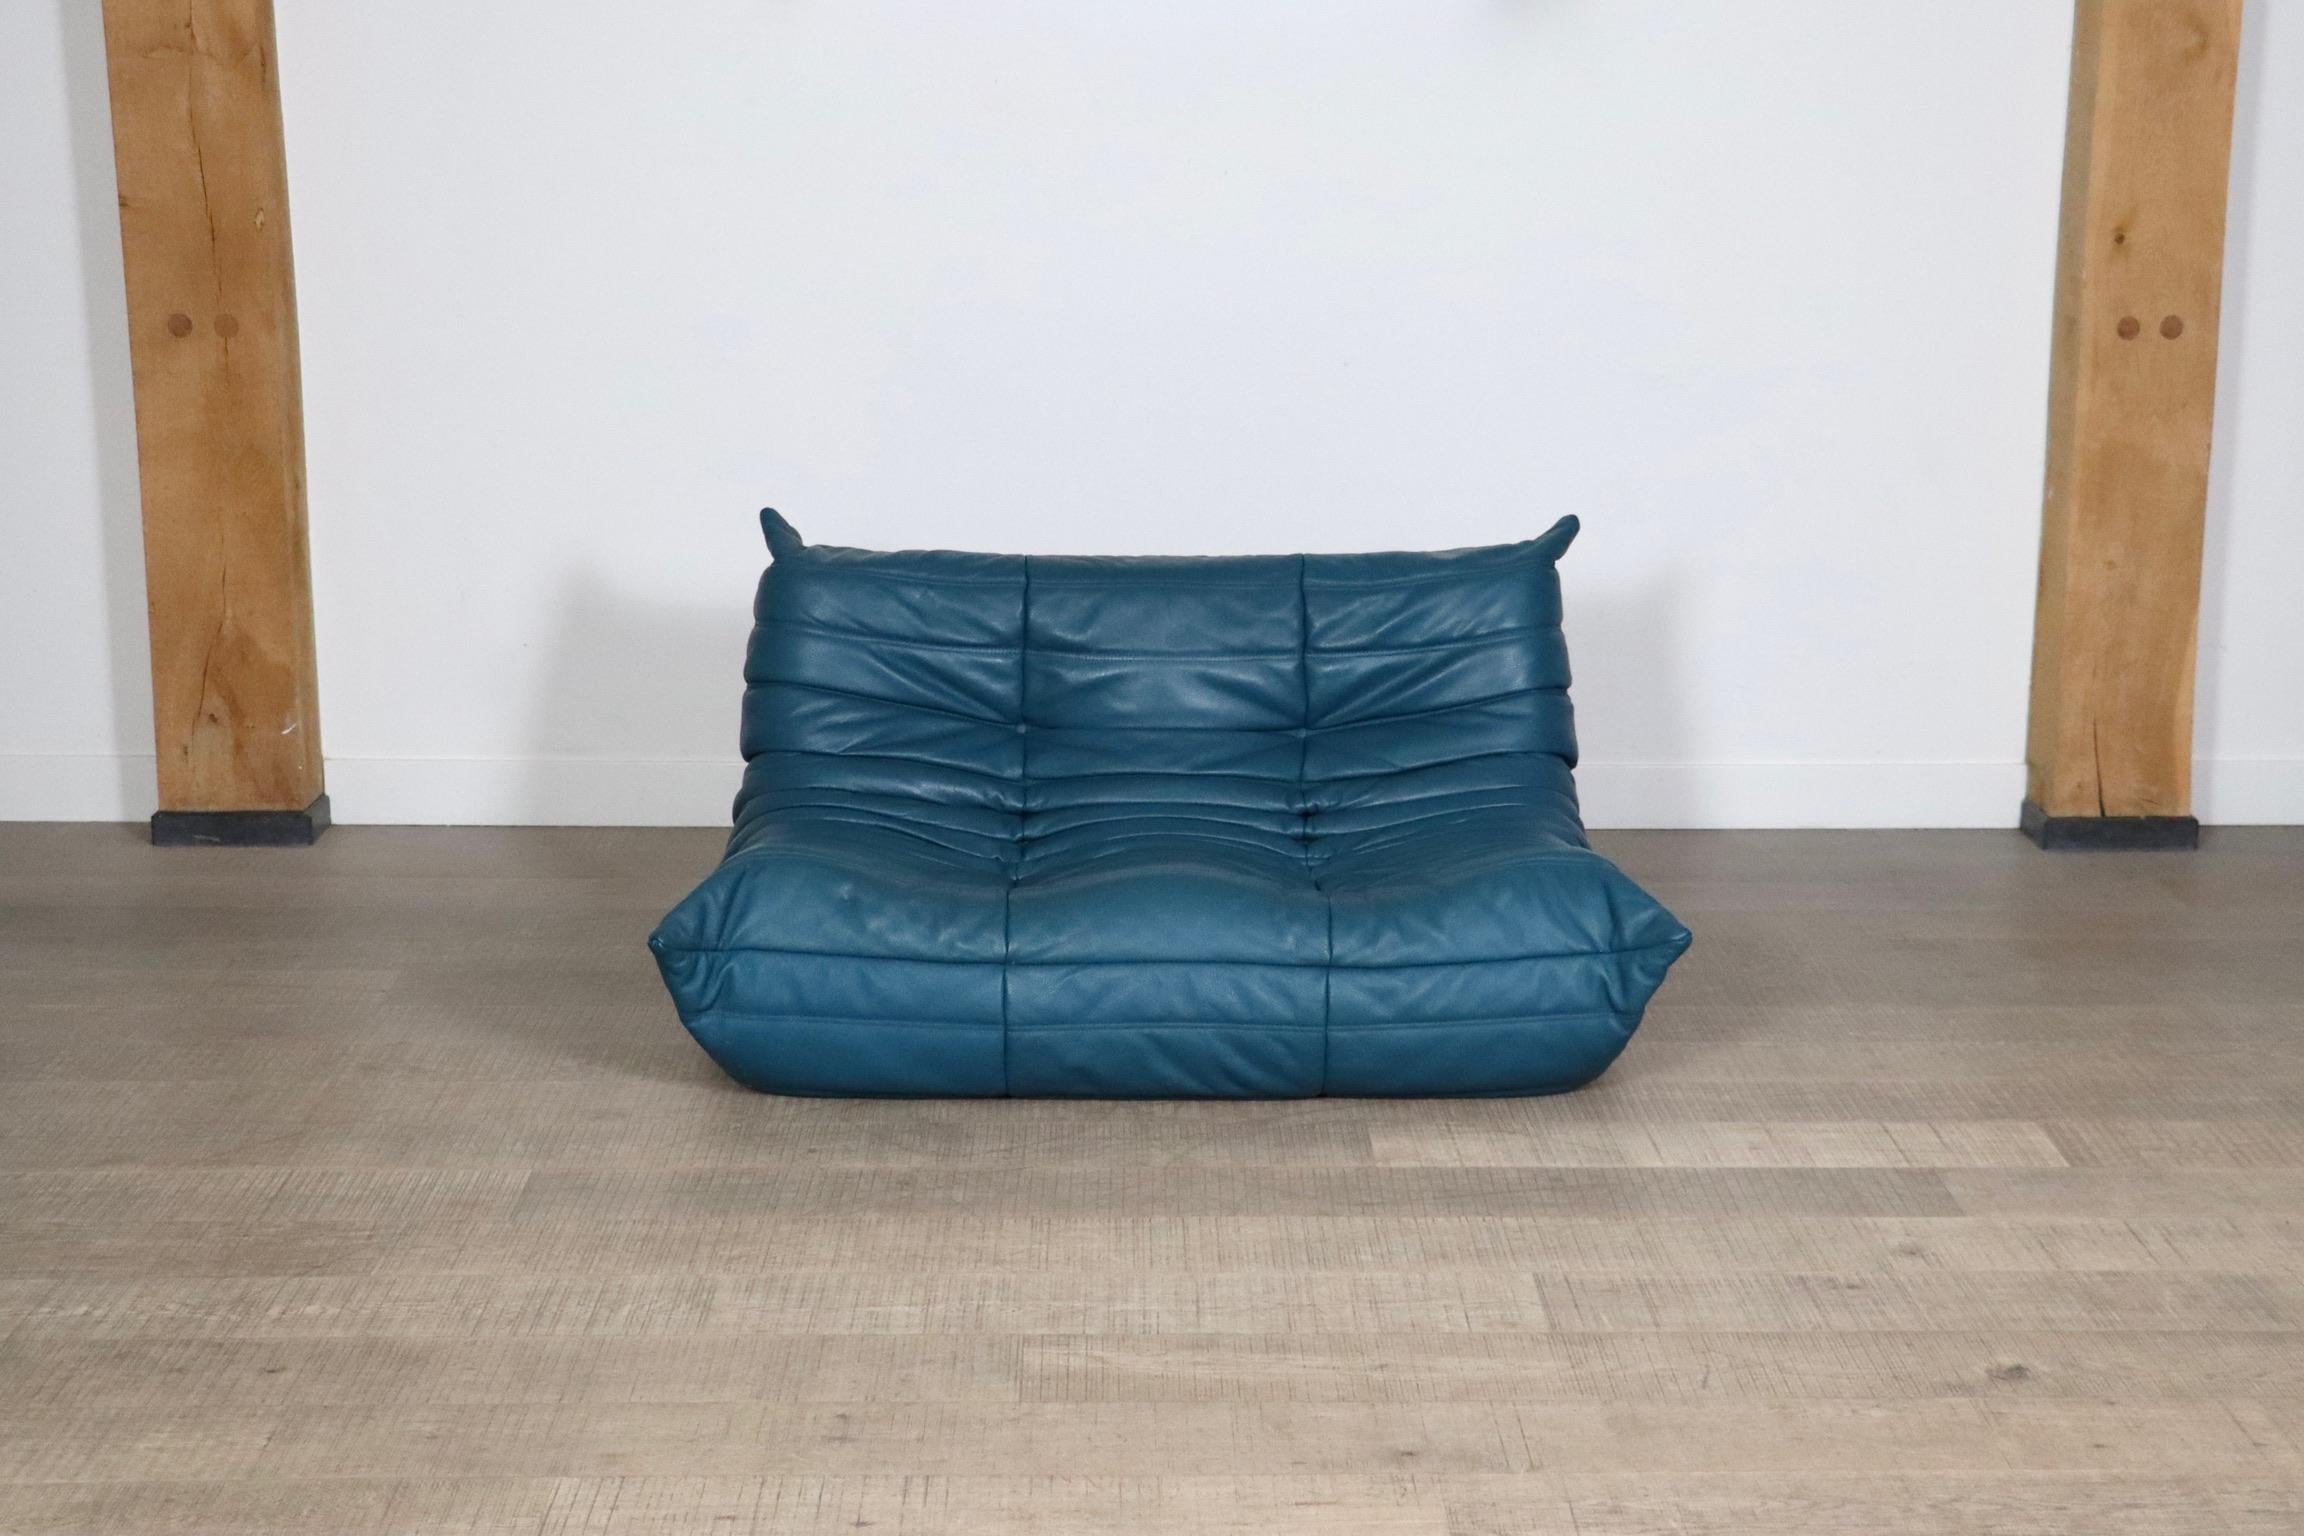 Beautiful Ligne Roset Togo two seater sofa in original Petrol blue leather by Michel Ducaroy, 1970s. This iconic design has become more and more popular over the years. The lightweight design combined with fun colors and materials make these seating